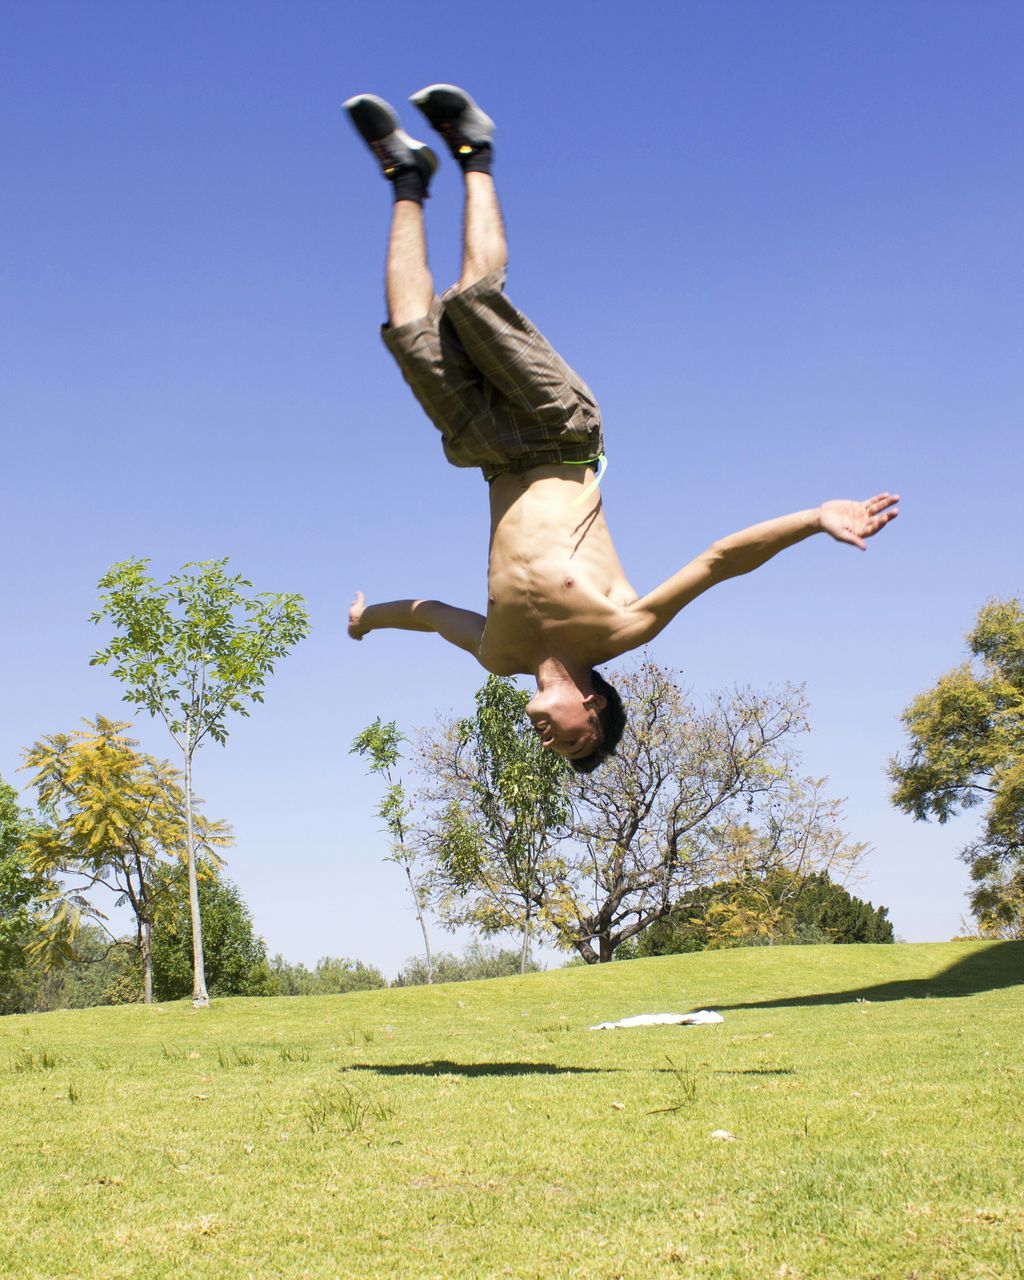 mid-air, full length, jumping, lifestyles, leisure activity, clear sky, arms outstretched, fun, freedom, enjoyment, grass, arms raised, blue, casual clothing, vitality, skill, low angle view, carefree